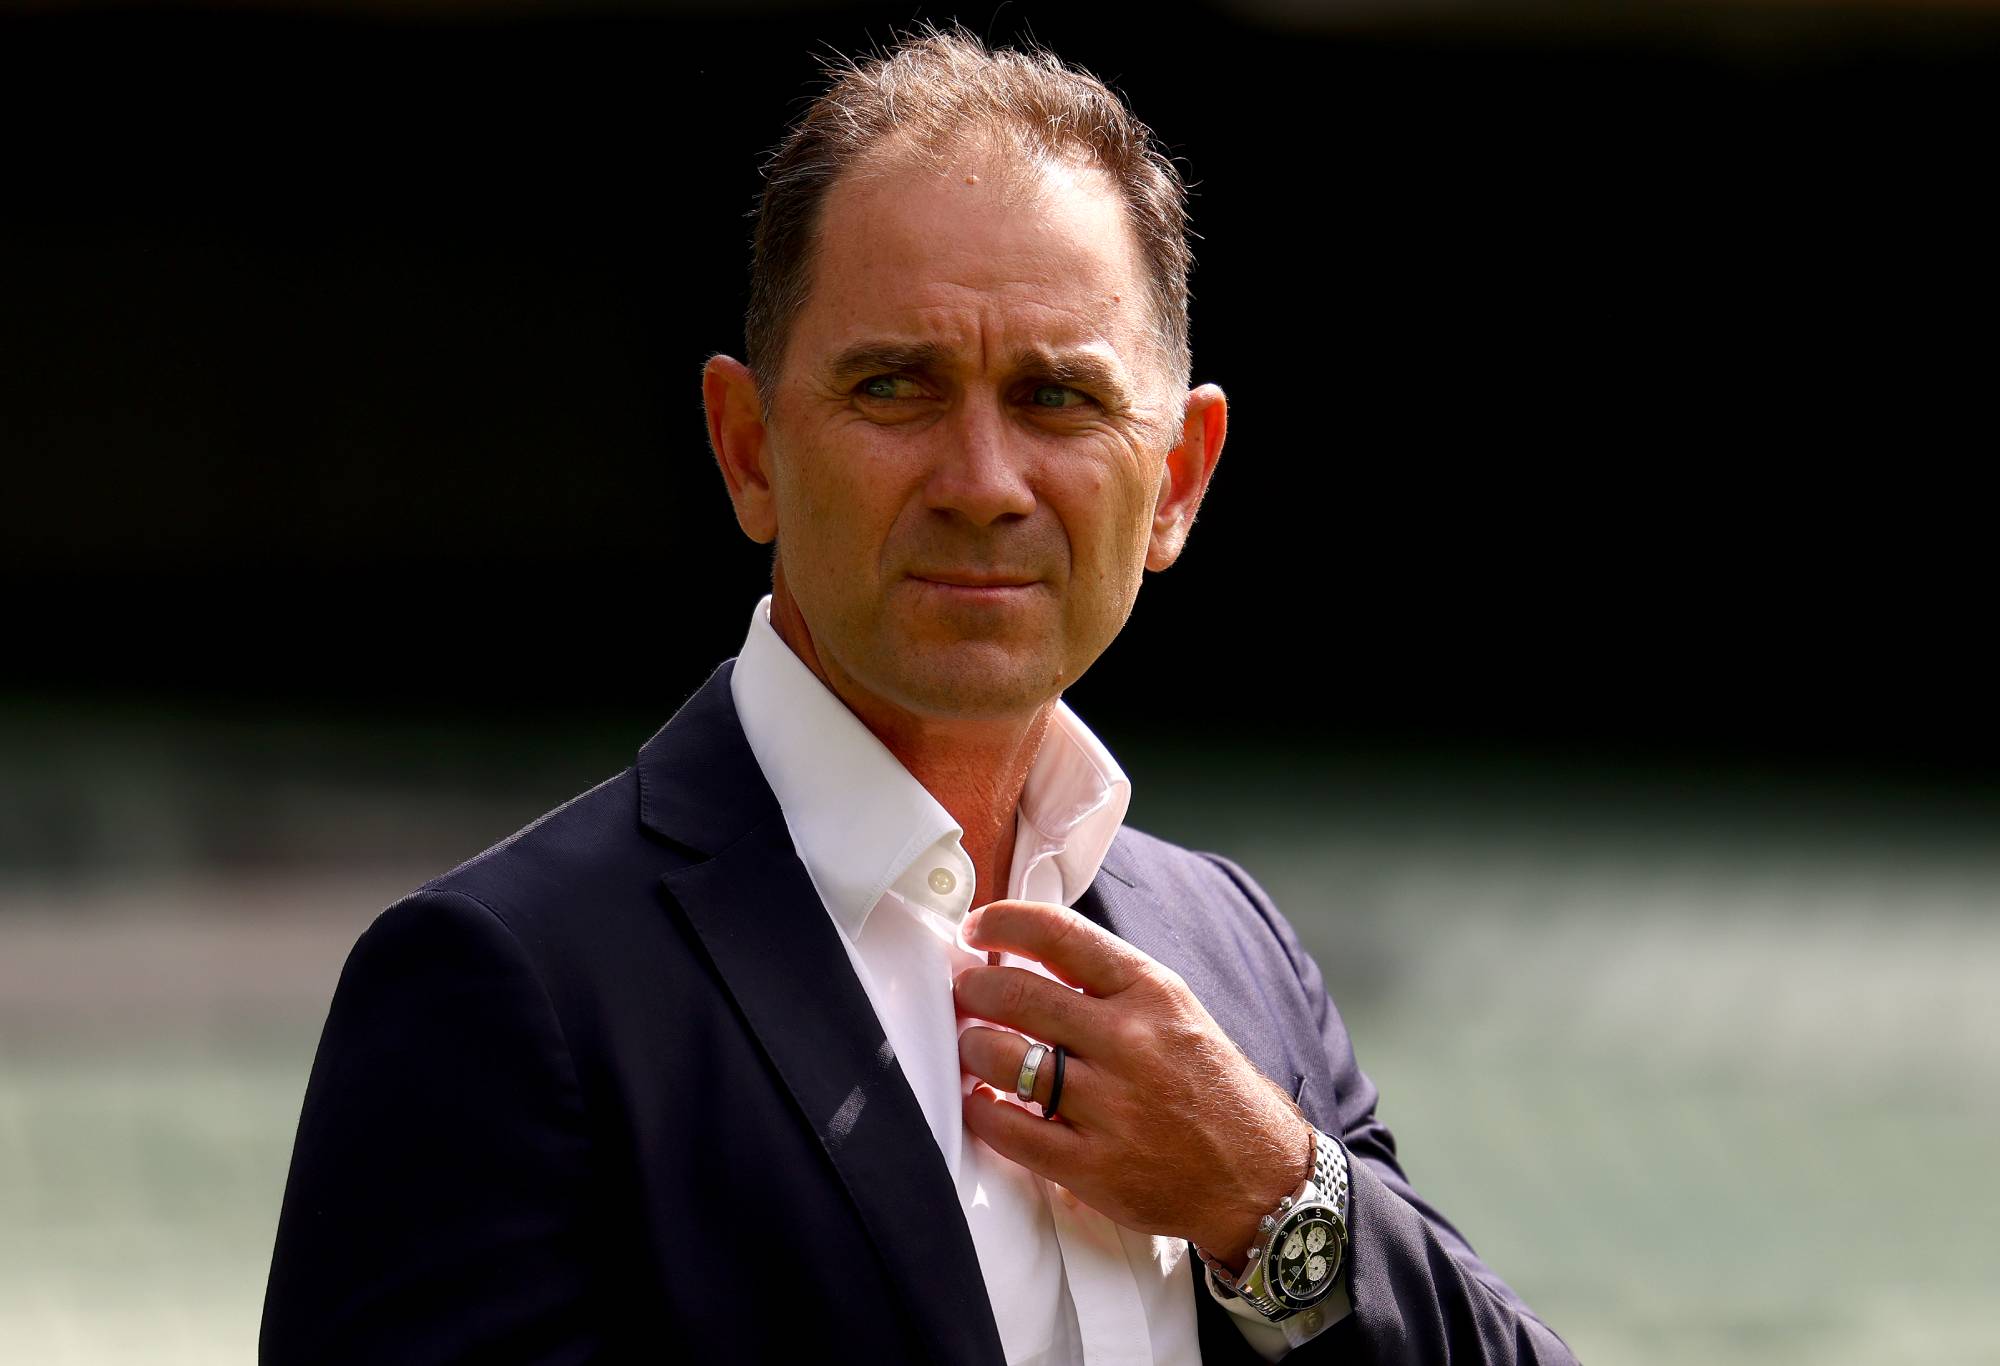 Former Australian cricketer Justin Langer pictured during an Australian Cricket Hall of Fame Presentation at Melbourne Cricket Ground on January 27, 2022 in Melbourne, Australia. (Photo by Jonathan DiMaggio/Getty Images for the Australian Cricketers' Association